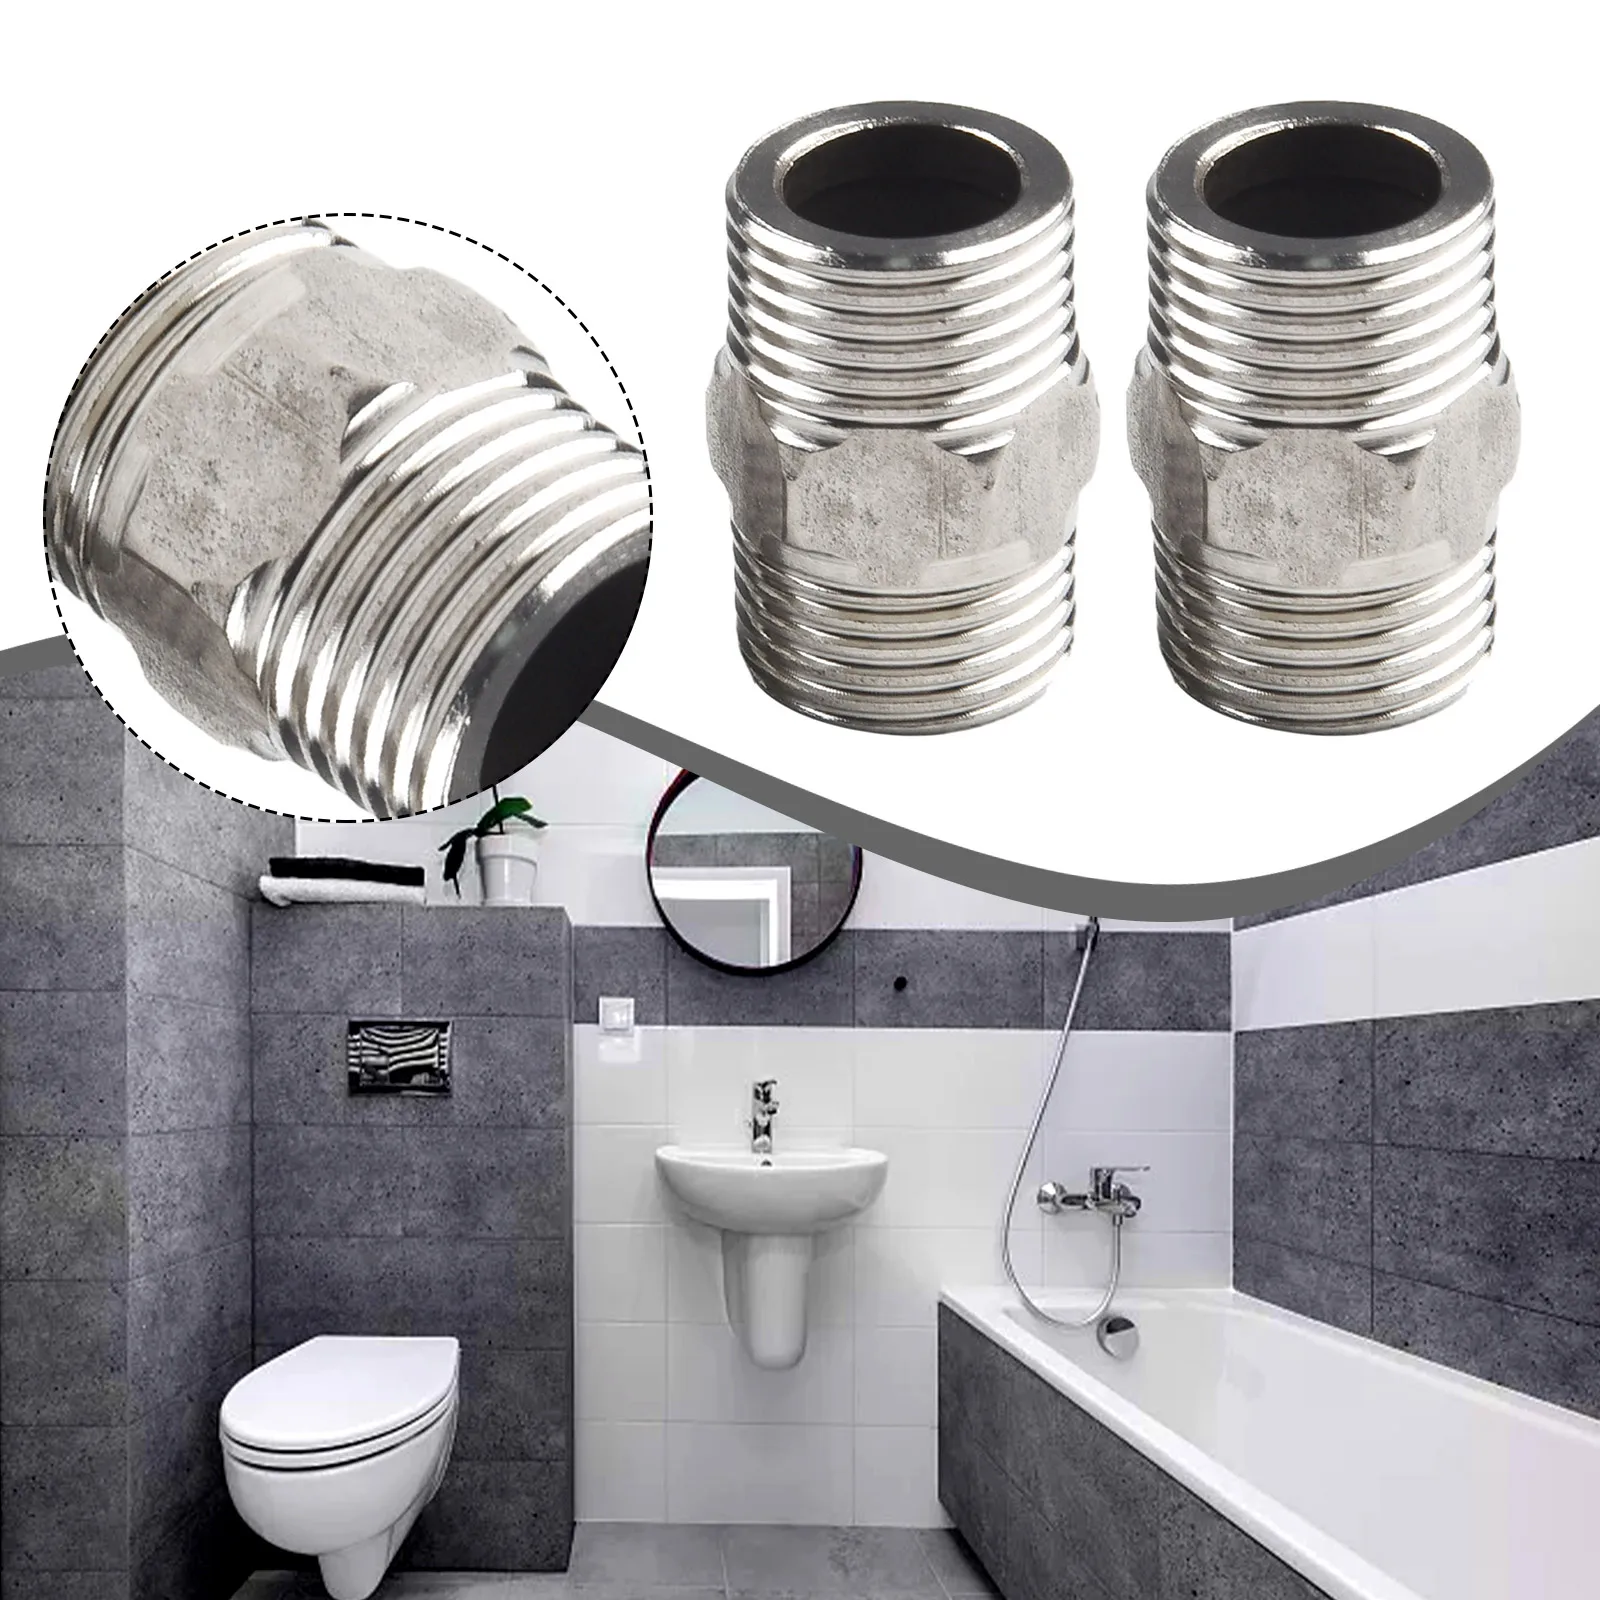 

Easy To Install High Quality RVs Outdoor Showers Hose Extension Shower Extender Accessories Durable Extension Tools